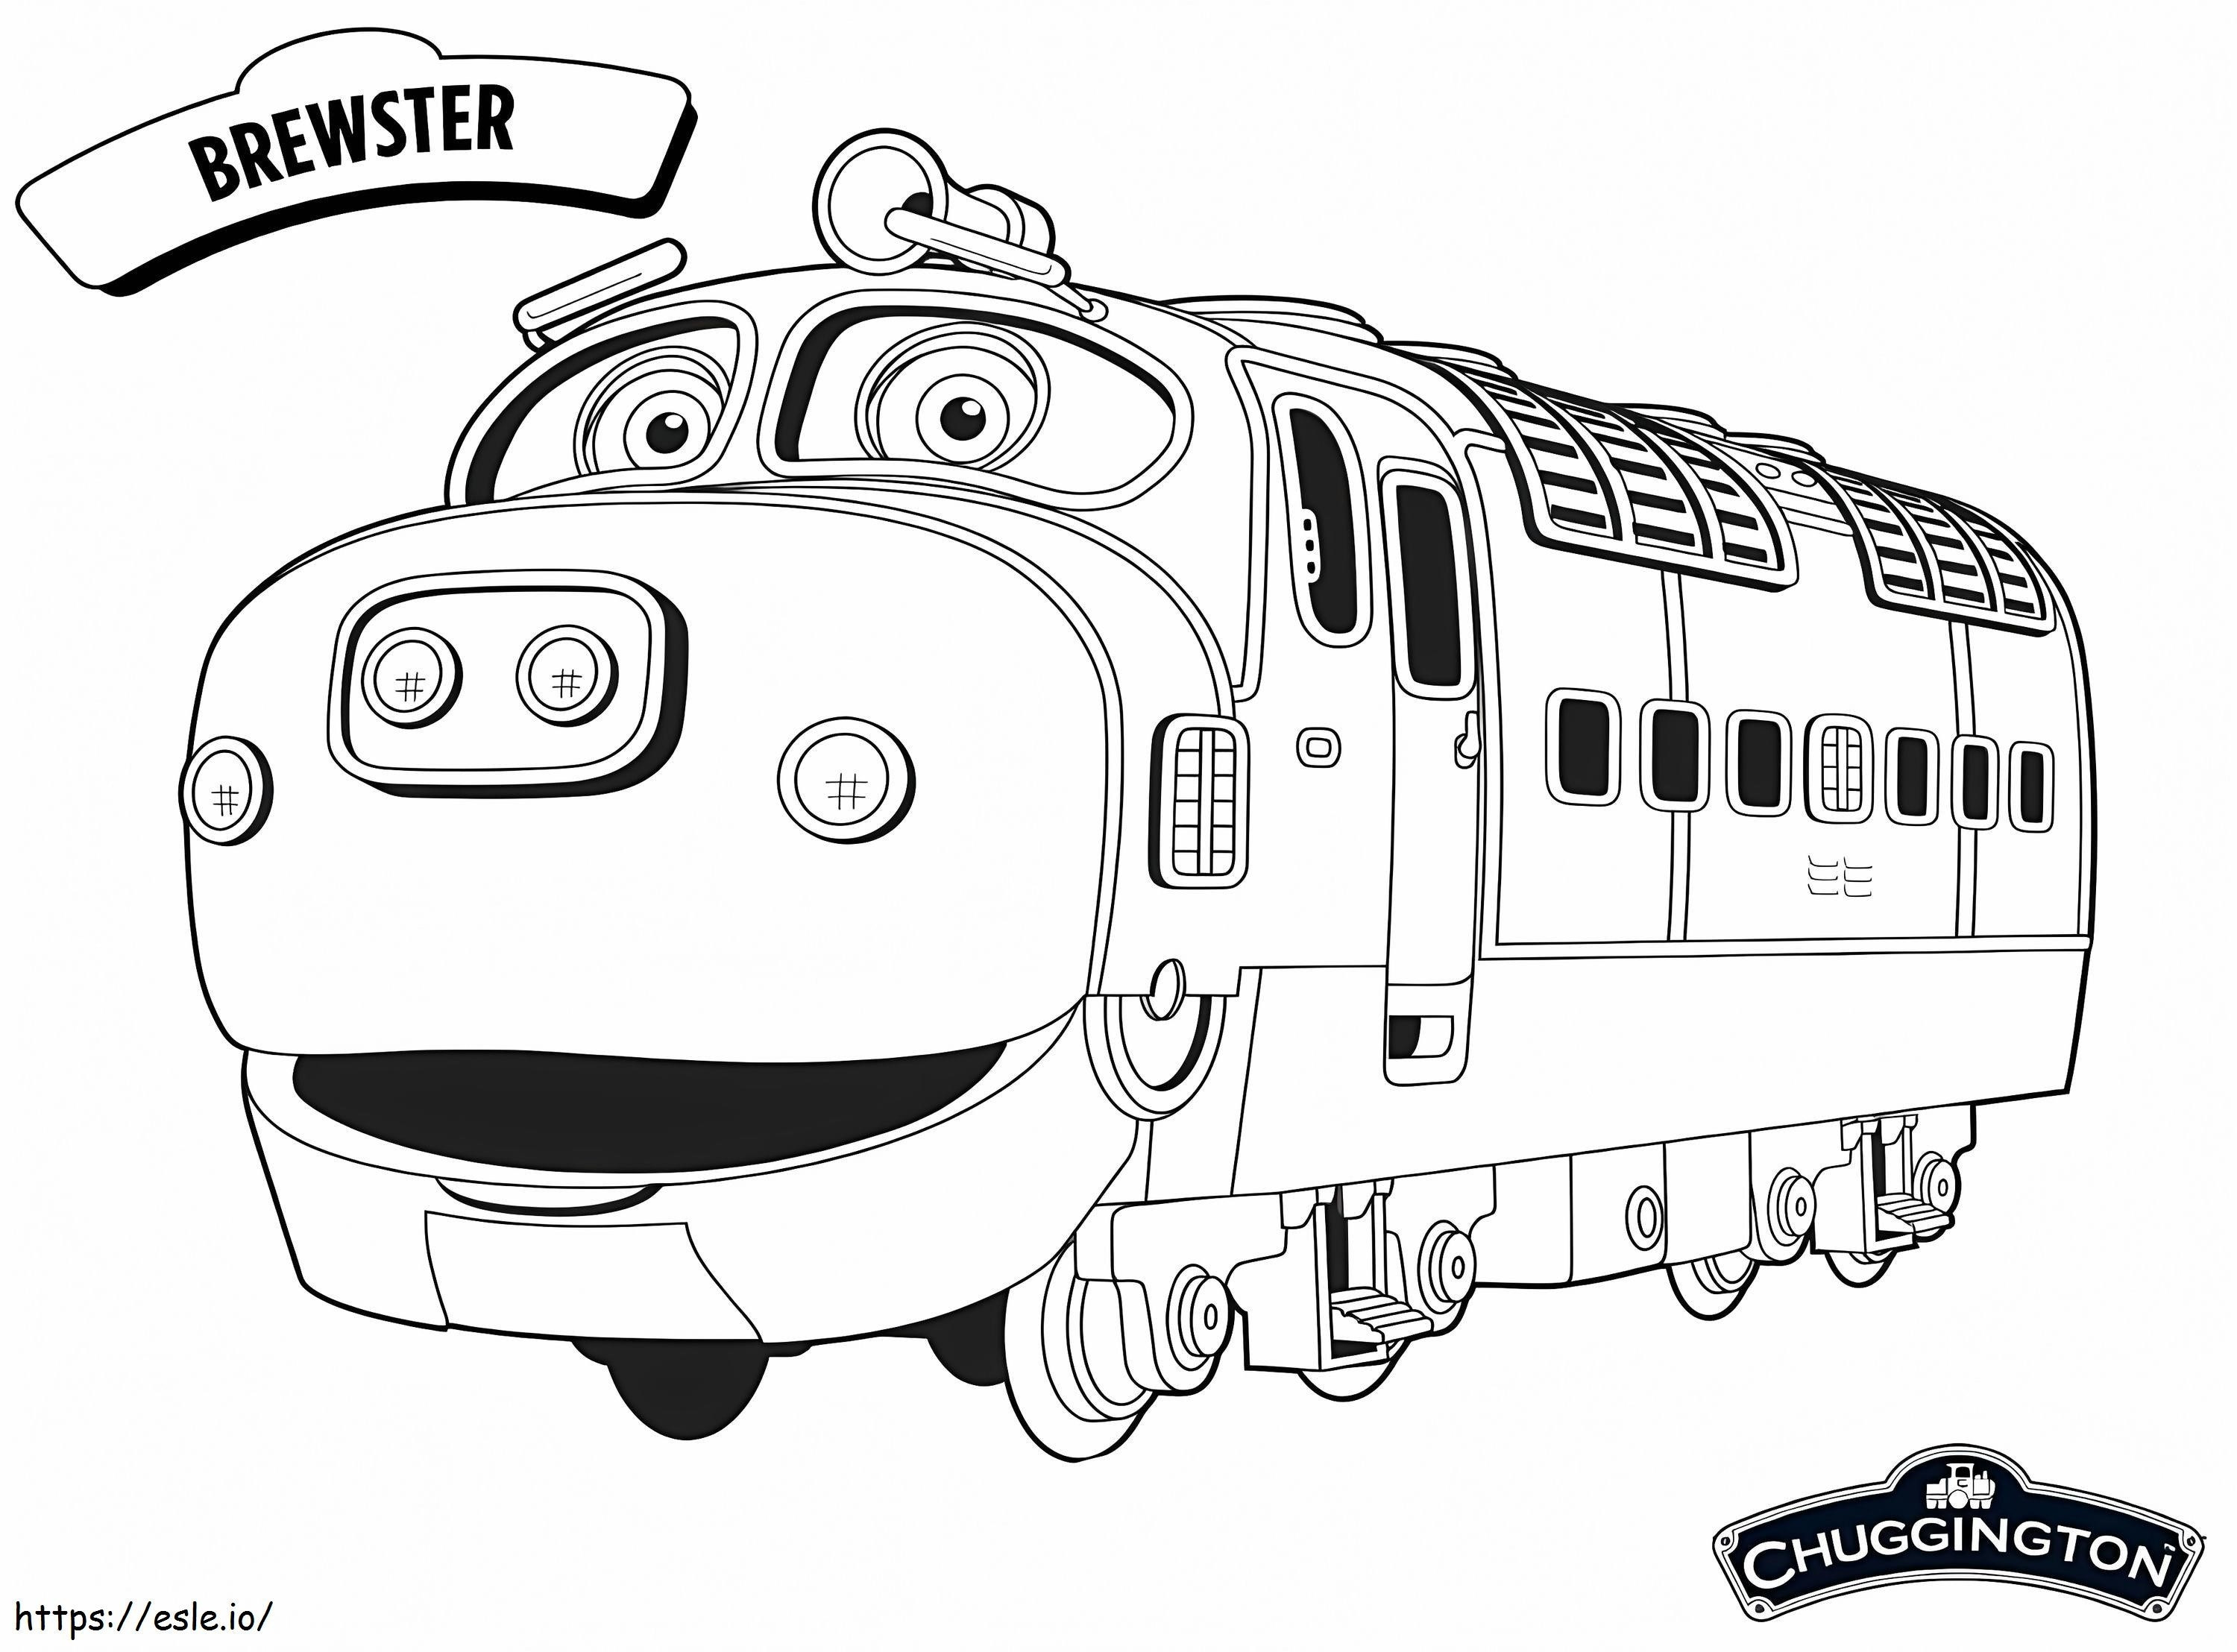 Brewster From Chuggington coloring page